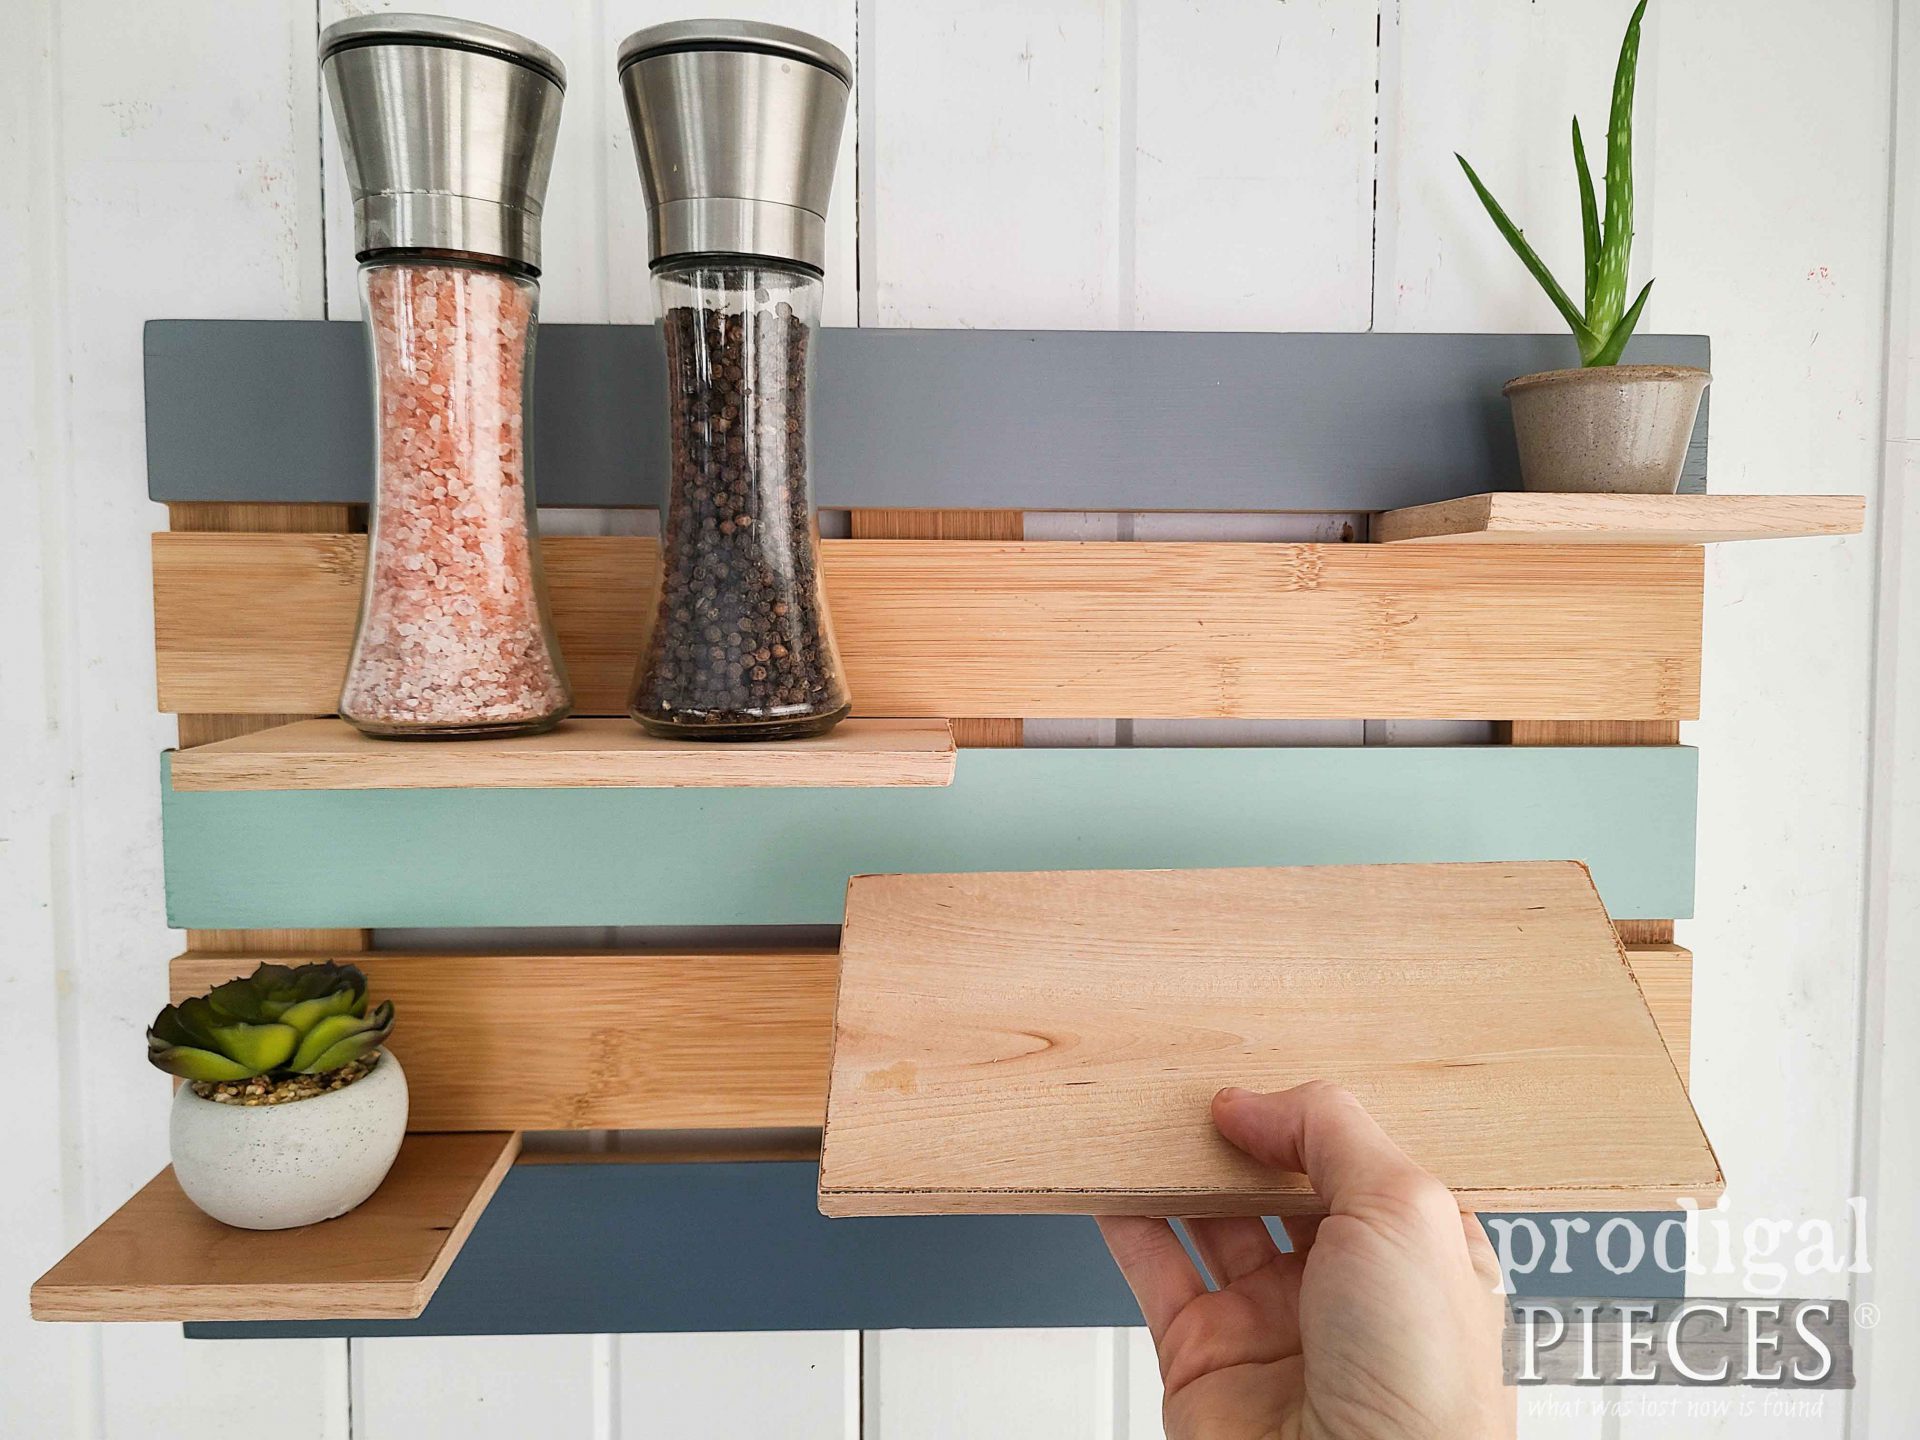 Removing Repurposed Trivet Shelf for Table Decor by Larissa of Prodigal Pieces | prodigalpieces.com #prodigalpieces #reclaimed #kitchen #homedecor